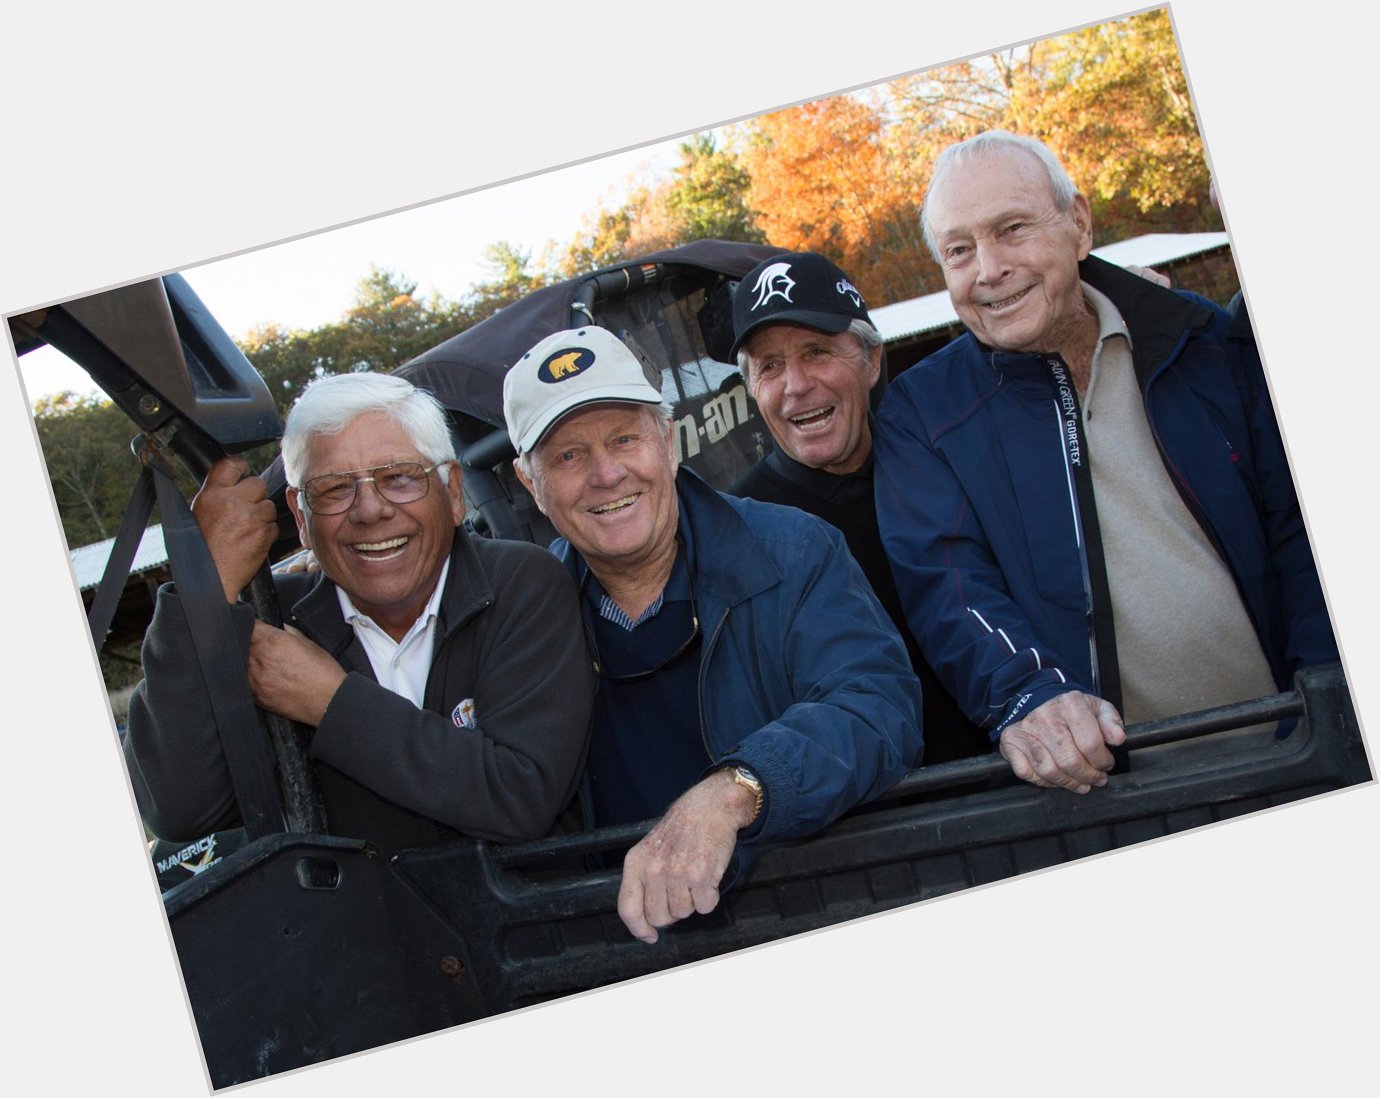 Happy birthday Lee Trevino! We are going to have so much fun with you designing the new 